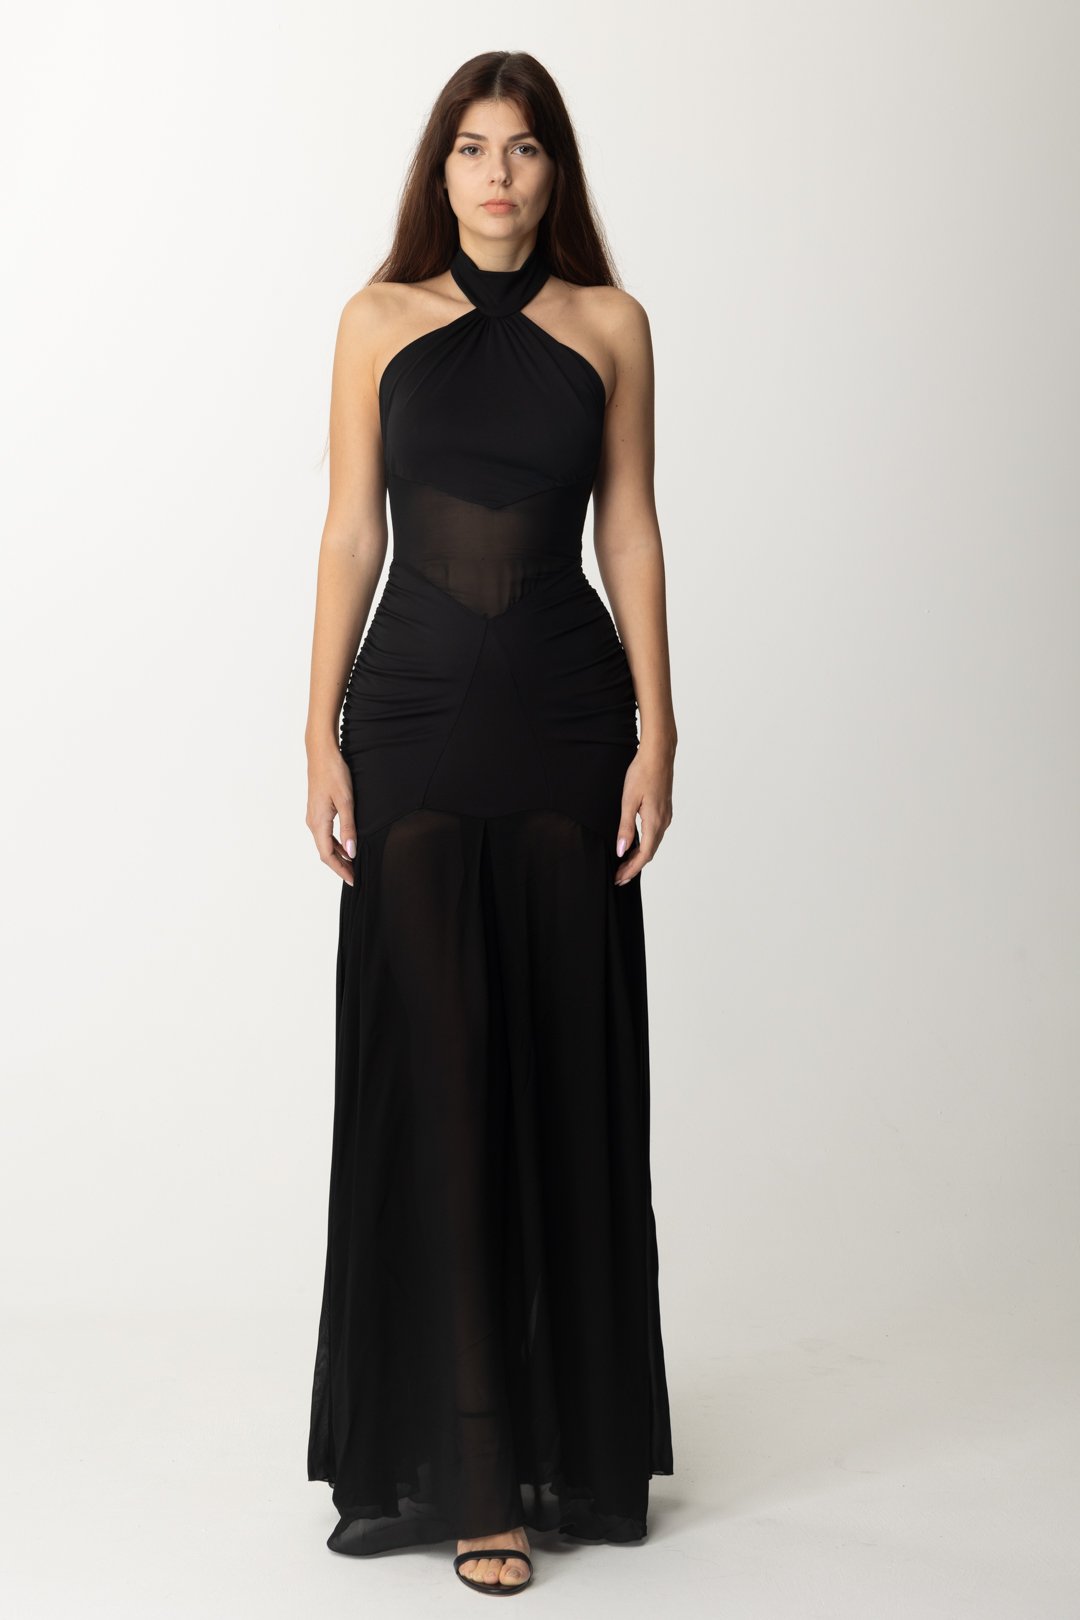 Preview: Aniye By Sienna Long Dress with Sheer Details Black